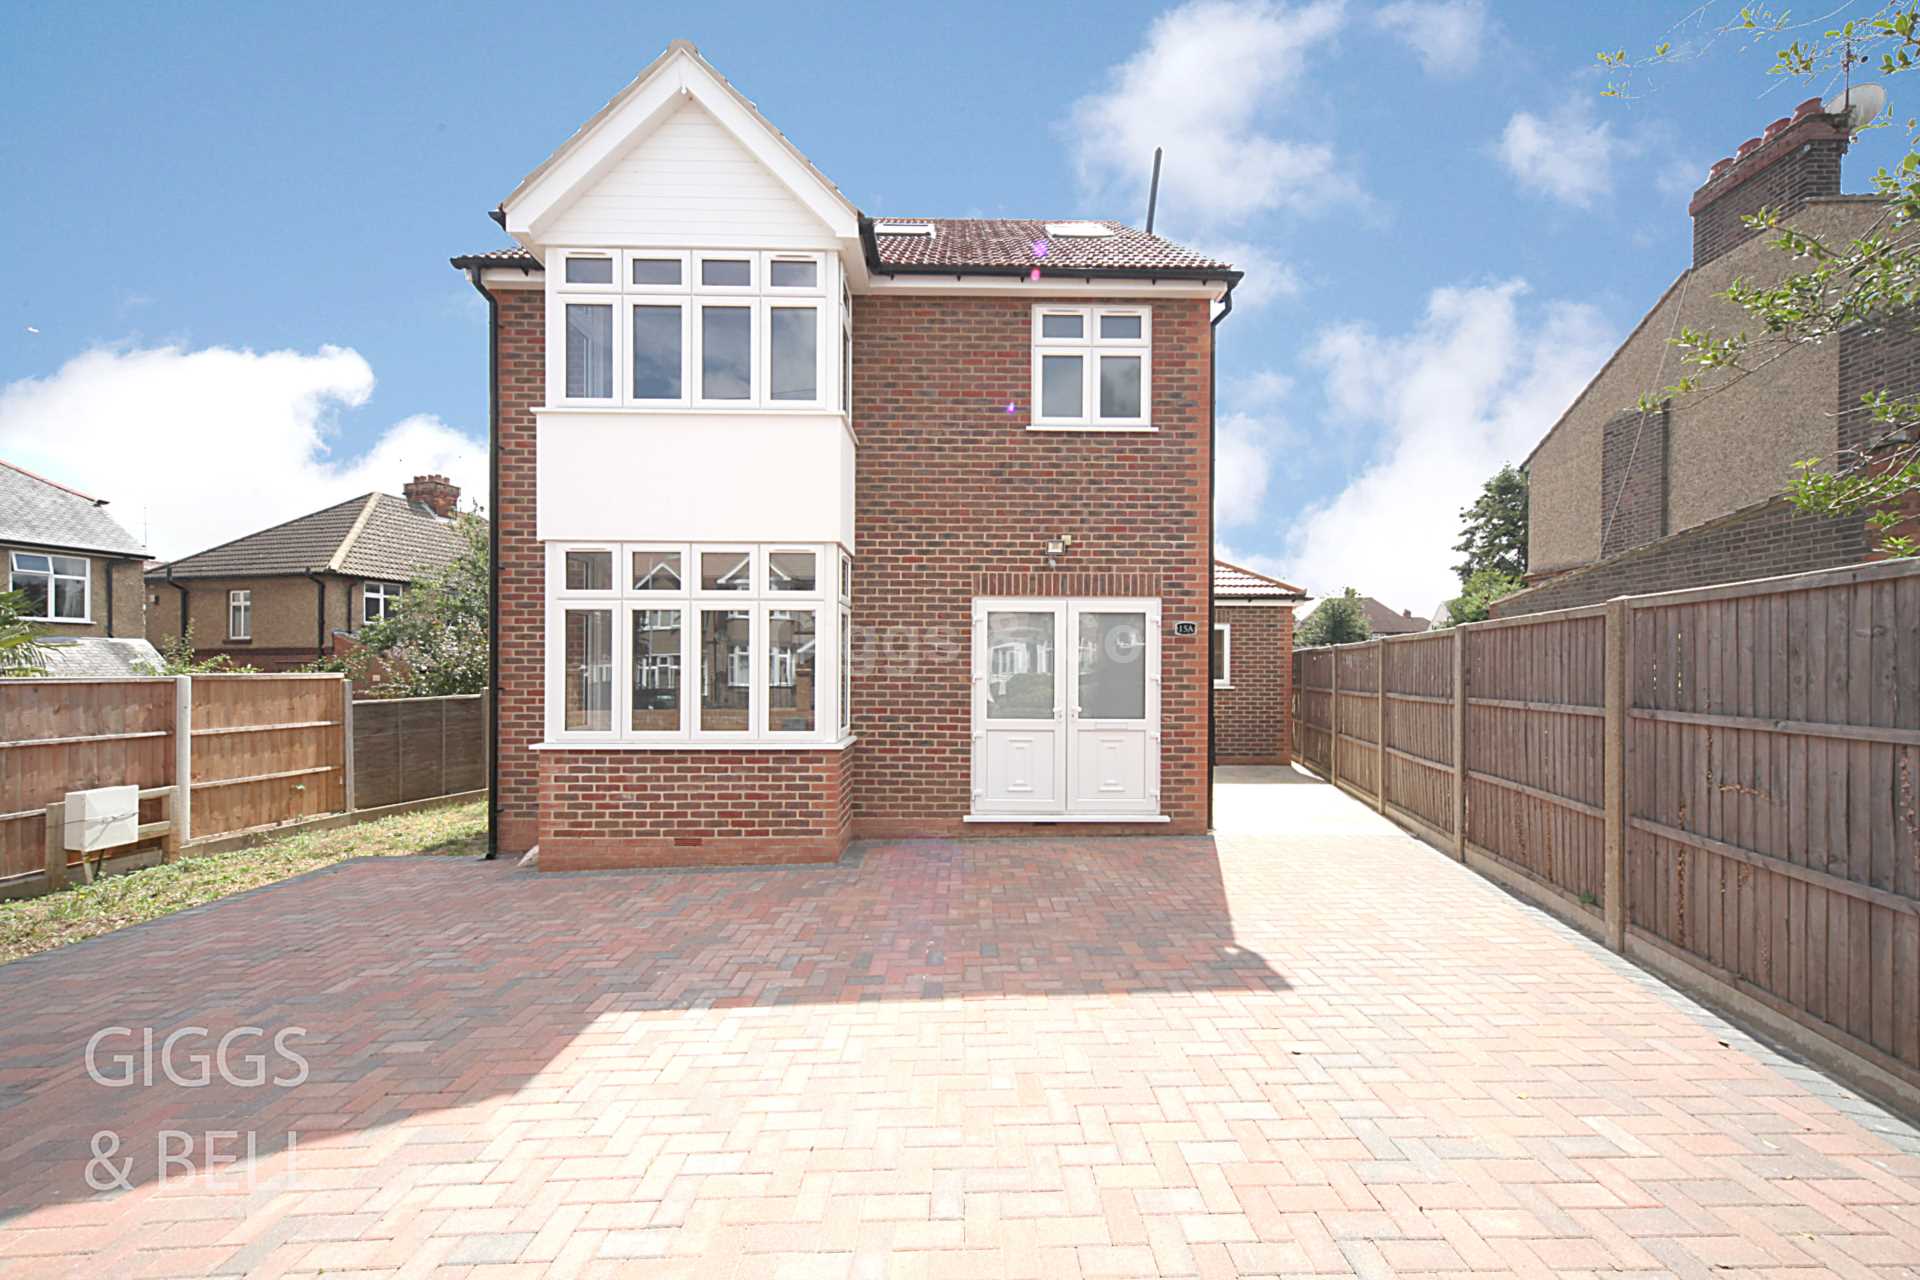 4 bed detached house to rent in St Michaels Crescent, Luton - Property Image 1